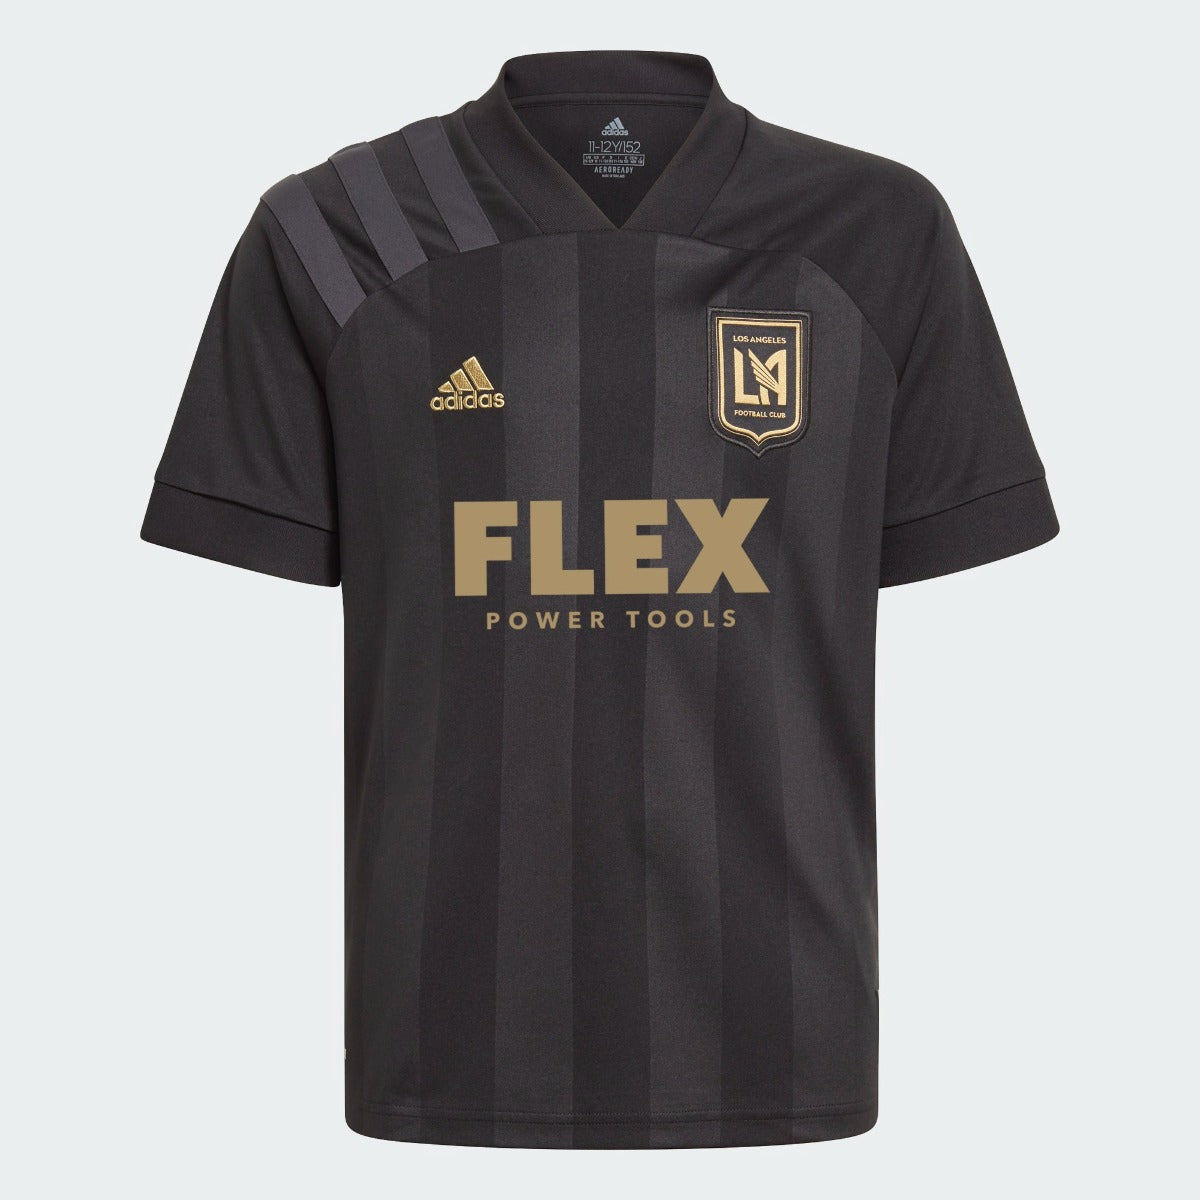 Adidas 2021 LAFC Youth Home Jersey - Black-Gold (Front)